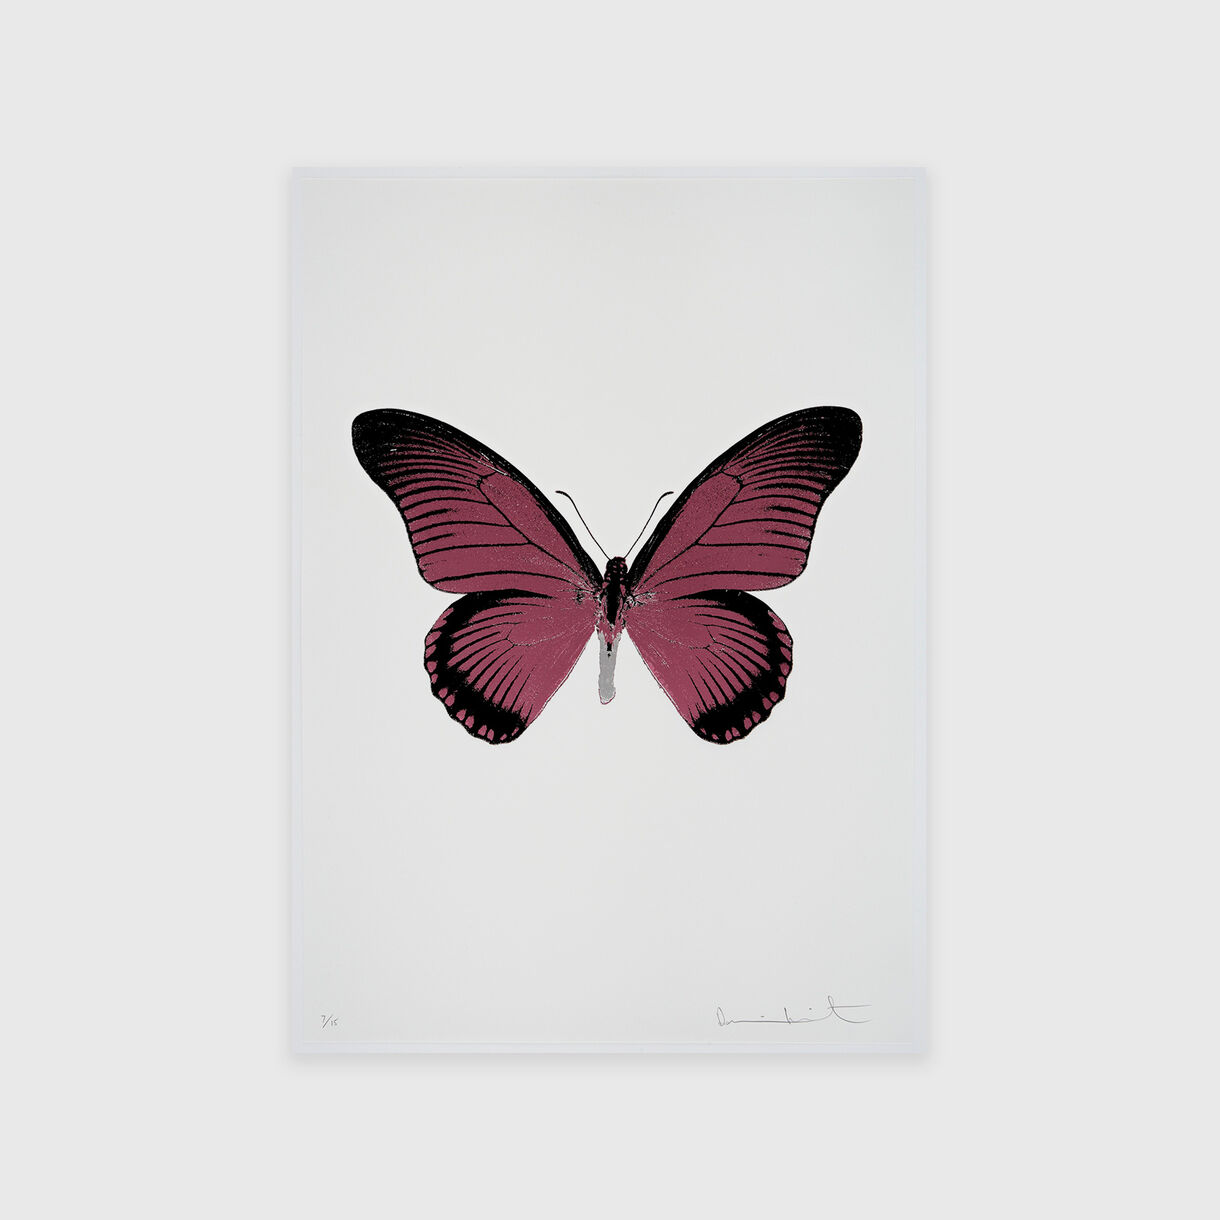 The Souls IV – Loganberry Pink, Raven Black, Silver Gloss, Damien Hirst